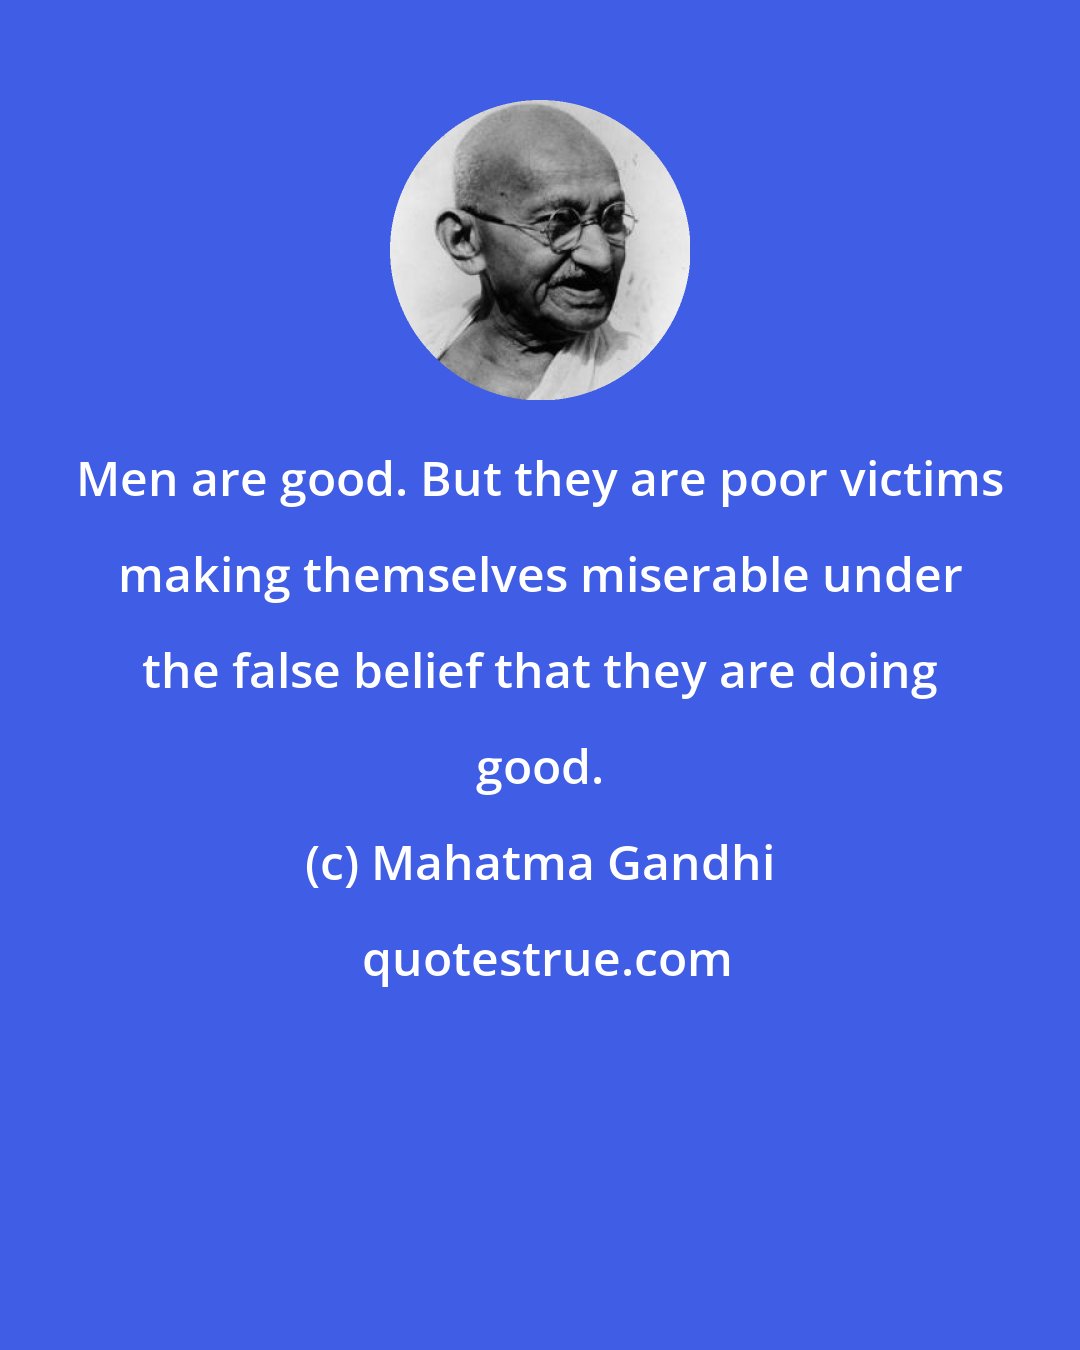 Mahatma Gandhi: Men are good. But they are poor victims making themselves miserable under the false belief that they are doing good.